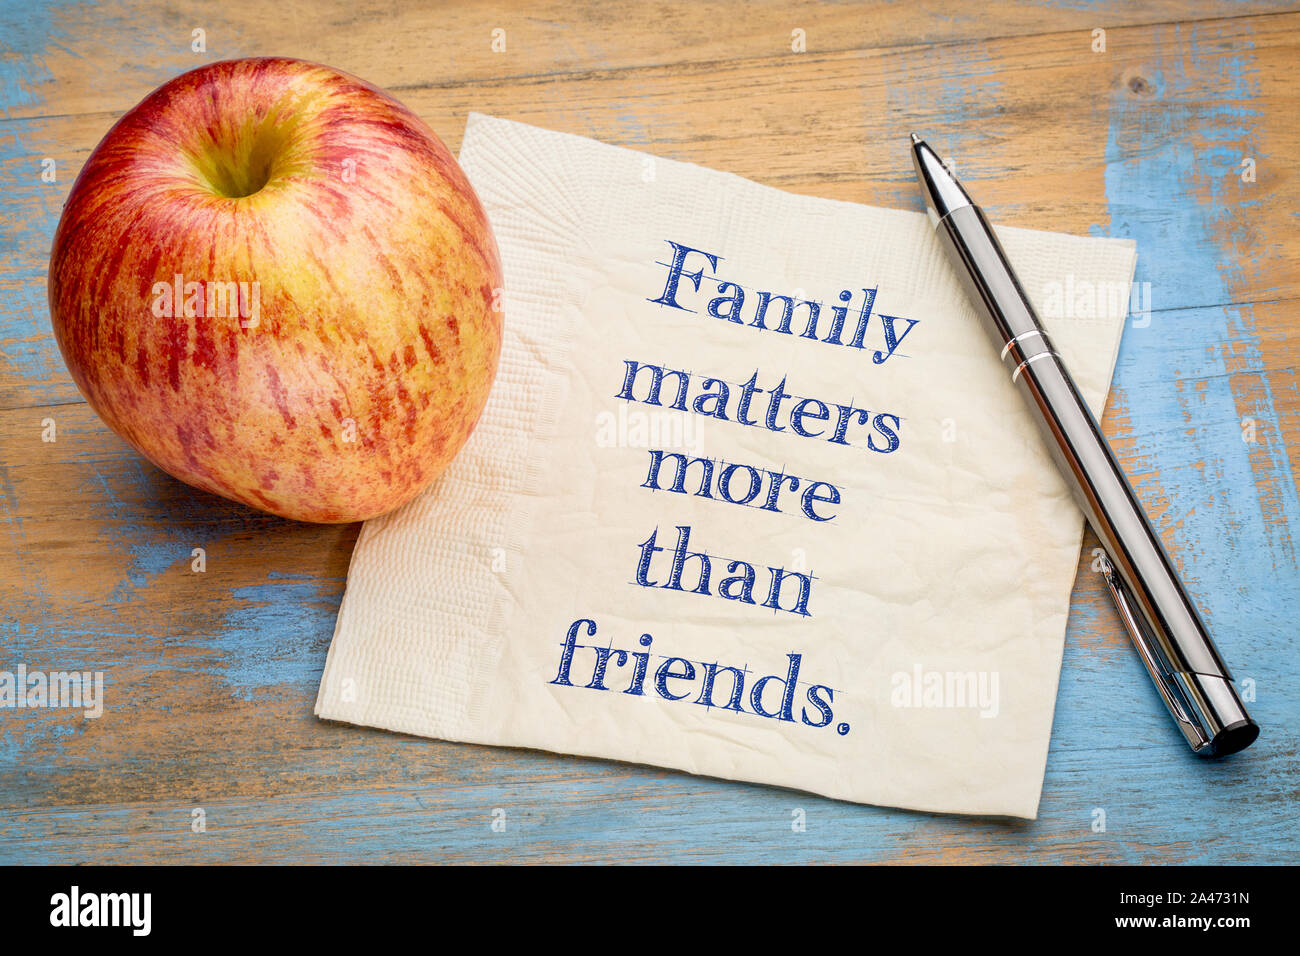 Does family matter more than friends?